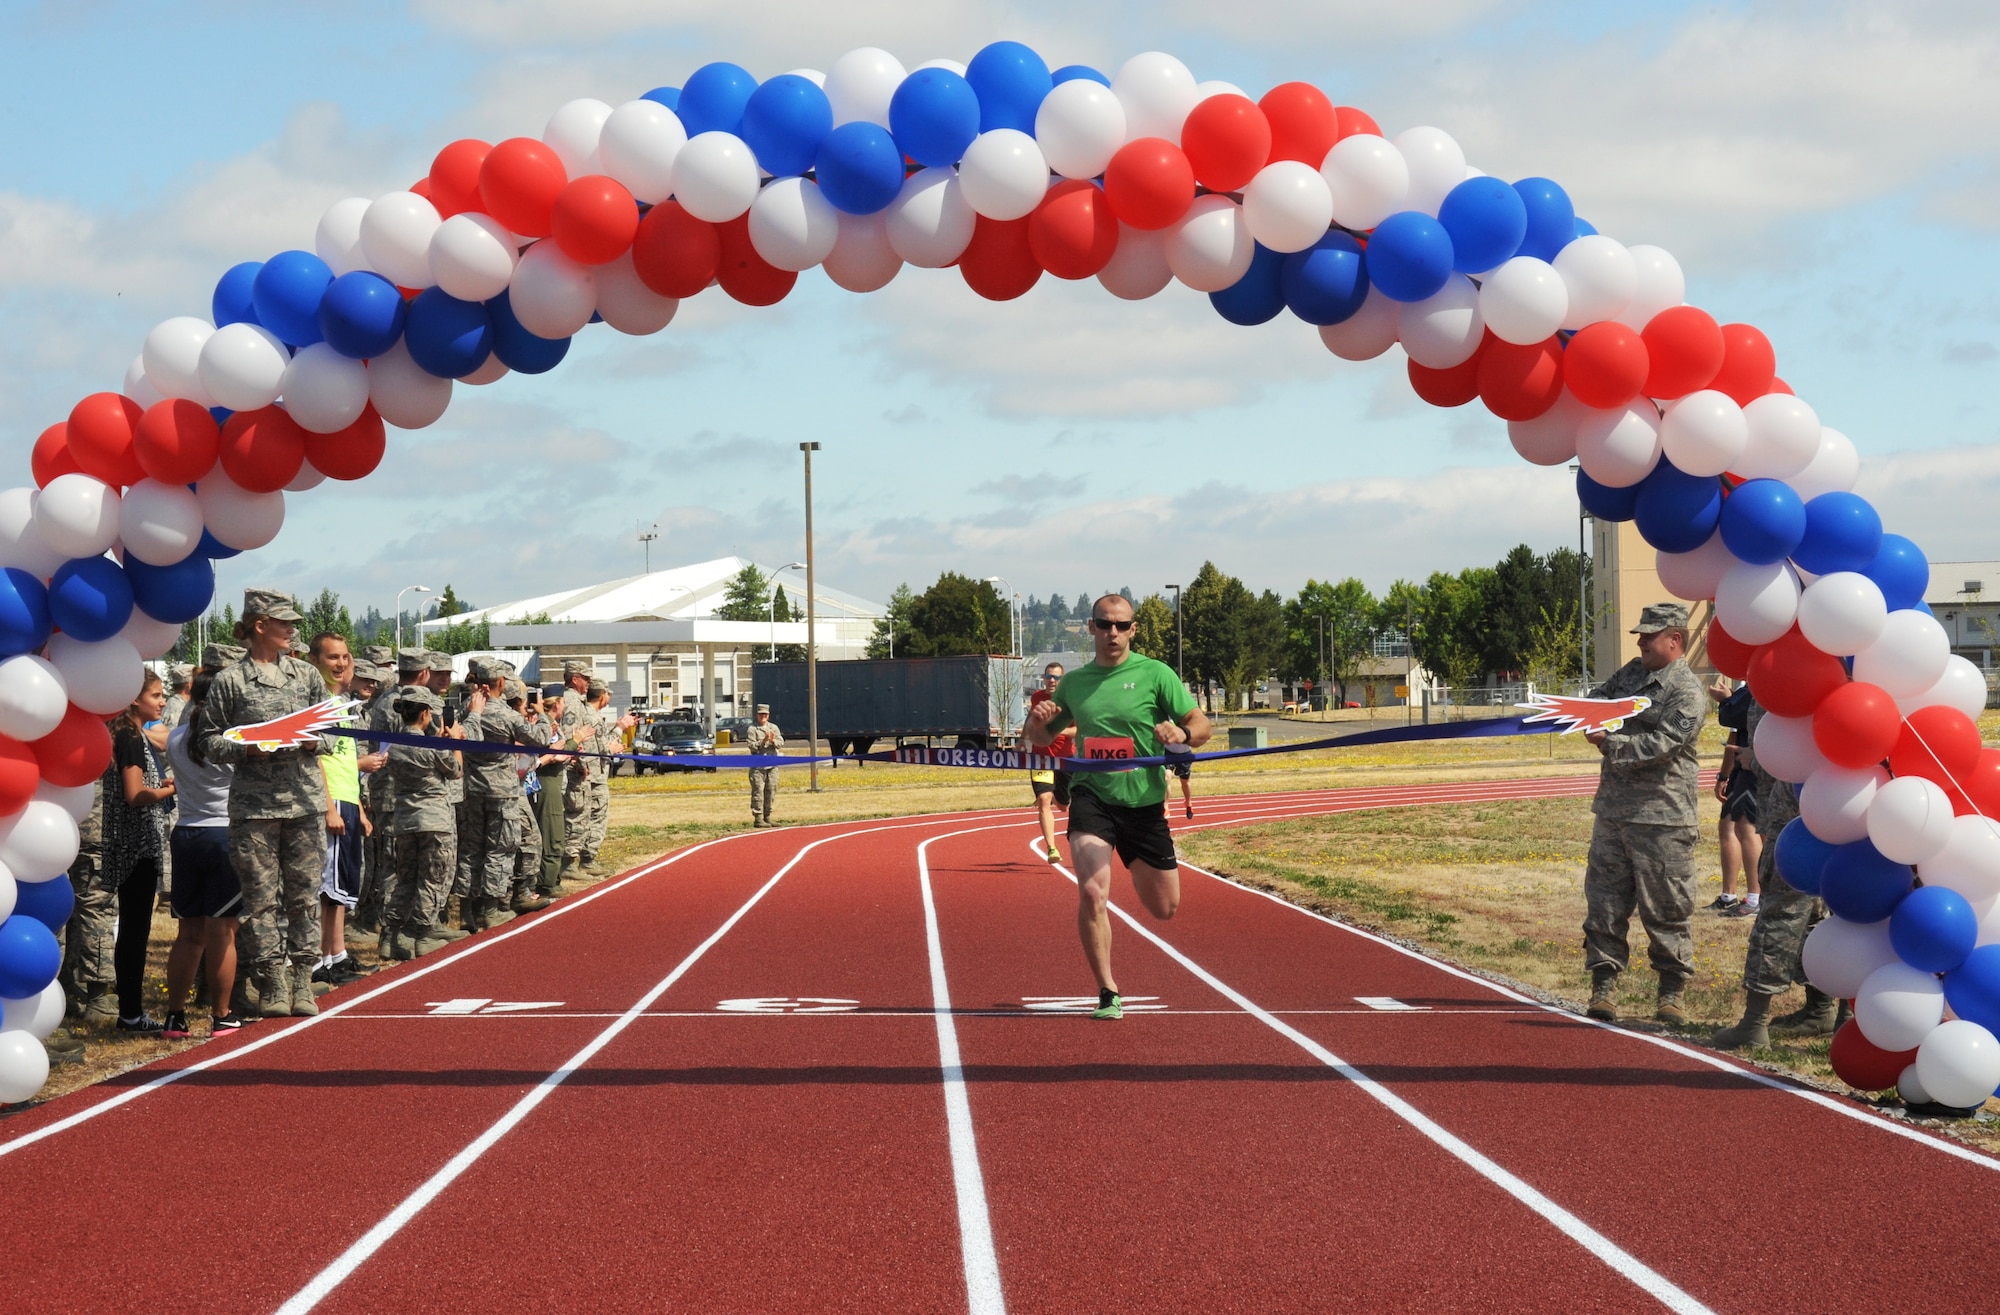 Oregon Air National Guard Staff Sgt. Alan Plank, assigned to the 142nd Fighter Wing Maintenance Group, crosses the finishing line and cuts the ceremony opening ribbon during the inaugural first race on the new track at the Portland Air National Guard Base, Ore., July 26, 2016. (U.S. Air National Guard photo by Tech. Sgt. John Hughel, 142nd Fighter Wing Public Affairs/Released)